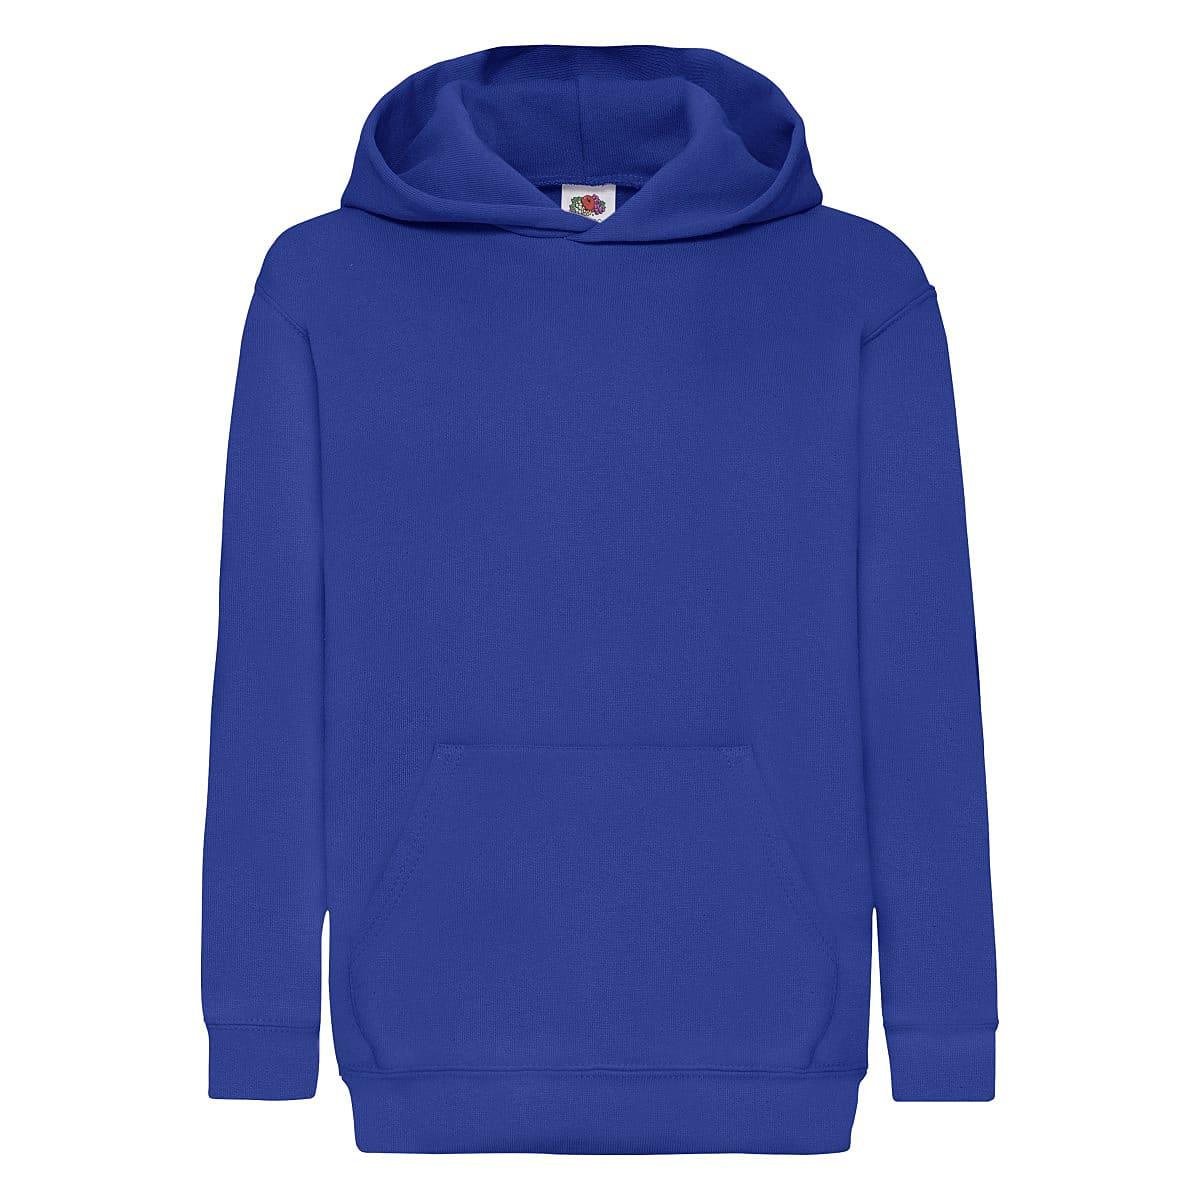 Fruit Of The Loom Childrens Hoodie in Royal Blue (Product Code: 62043)